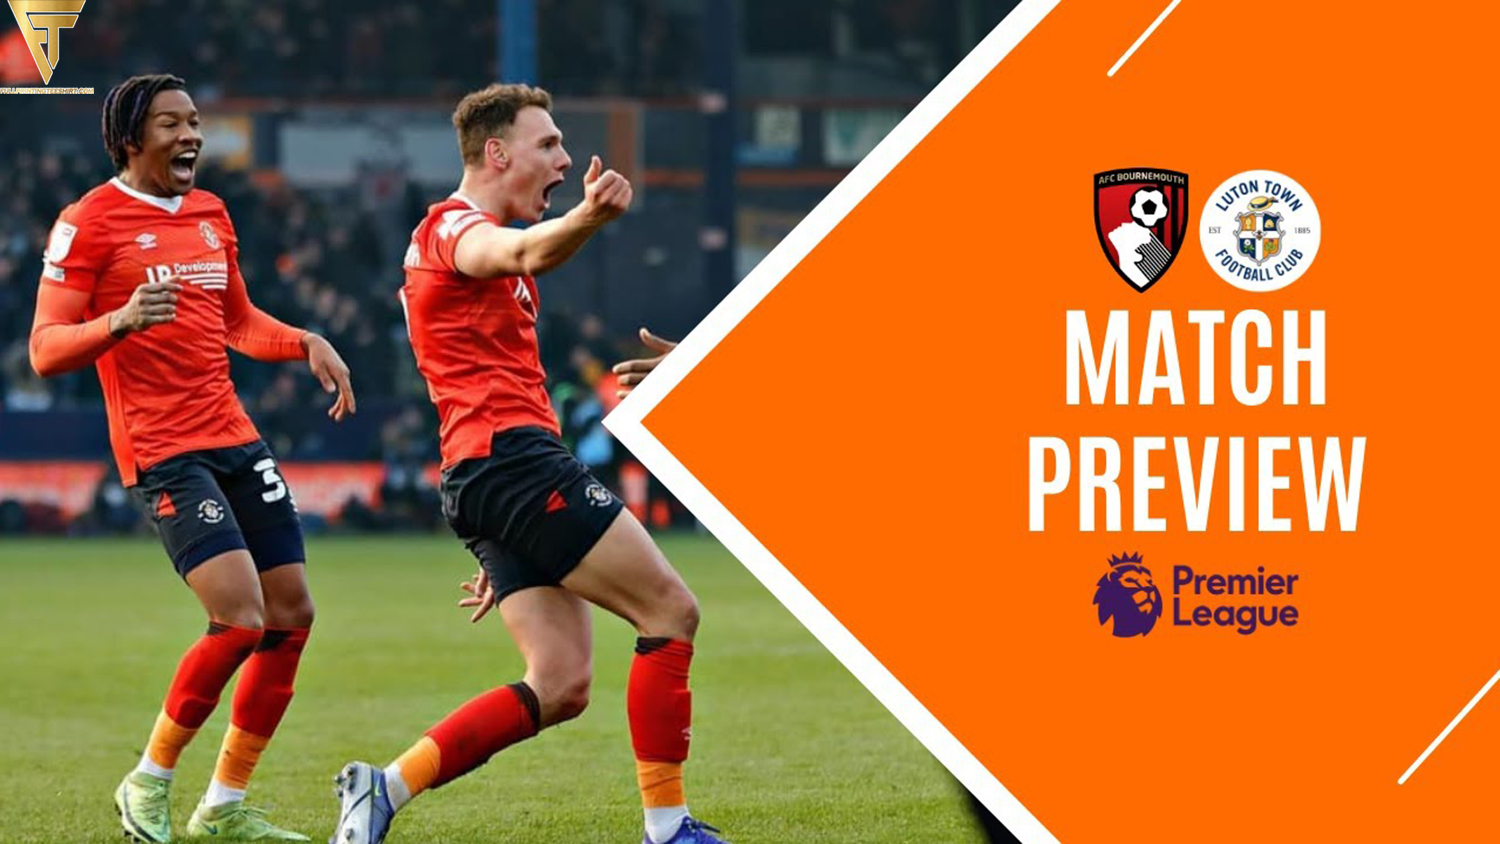 Under the Lights at Vitality Bournemouth and Luton's Premier League Duel